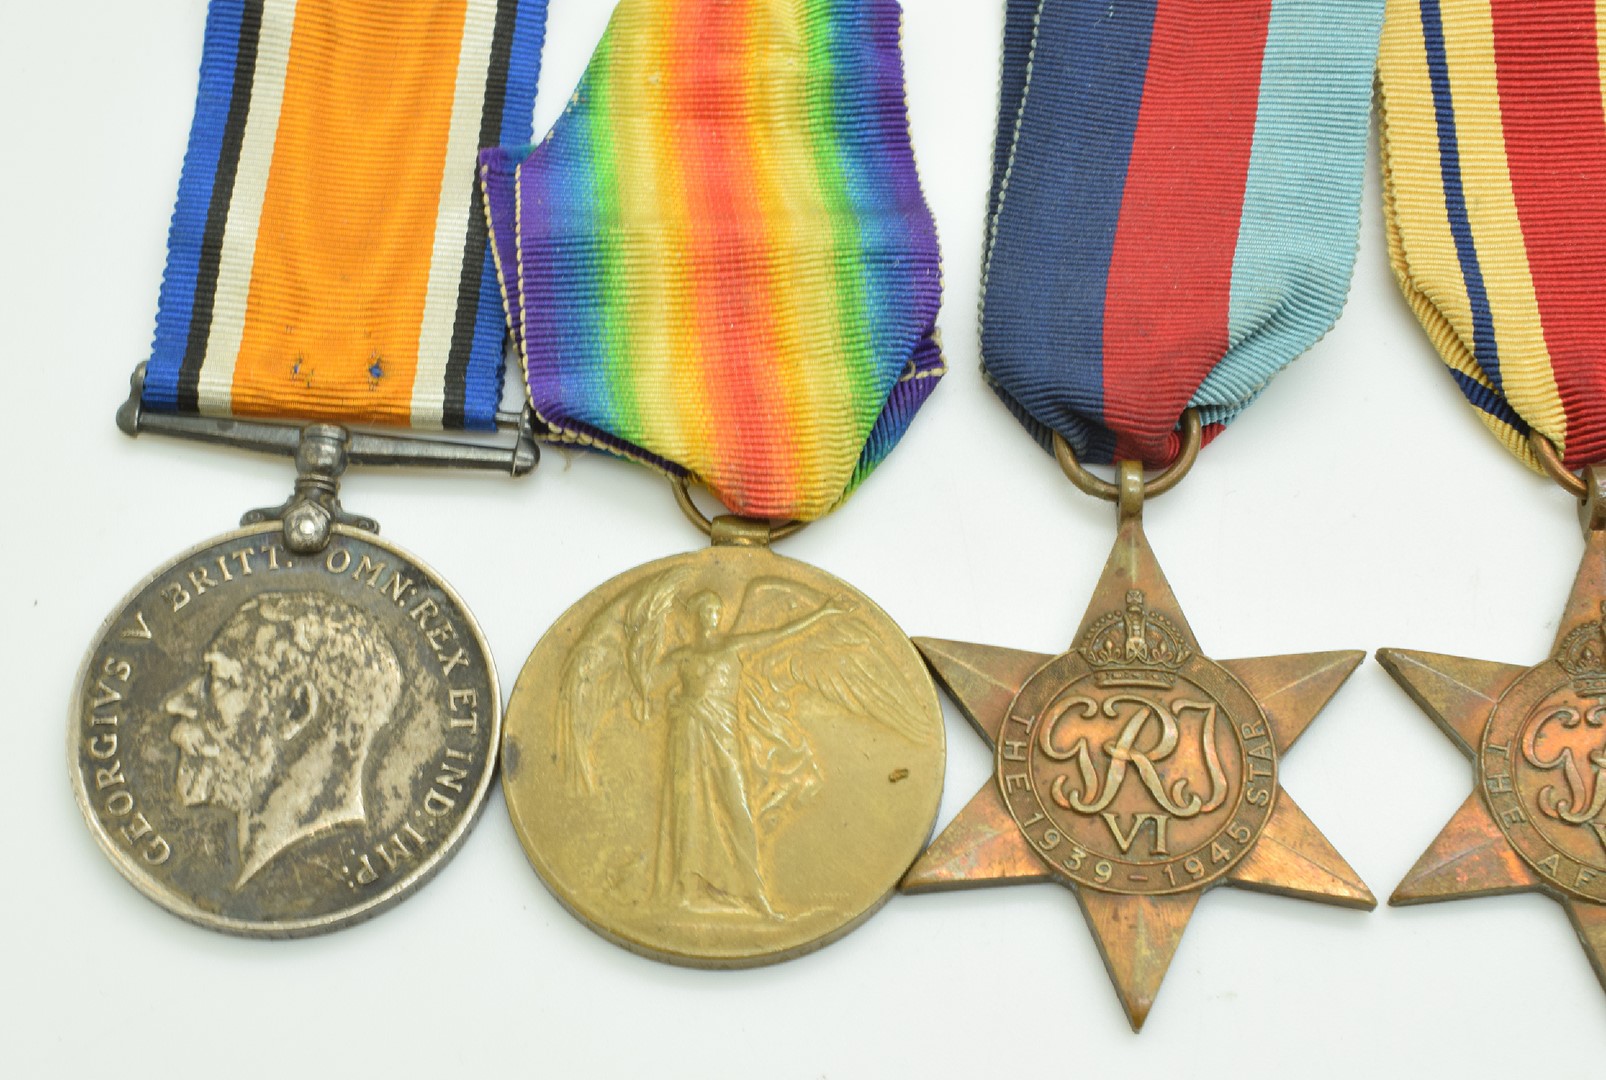 British Army WW1 medals comprising Victory Medal and War Medal, both named to 56118 Private J H - Image 3 of 8